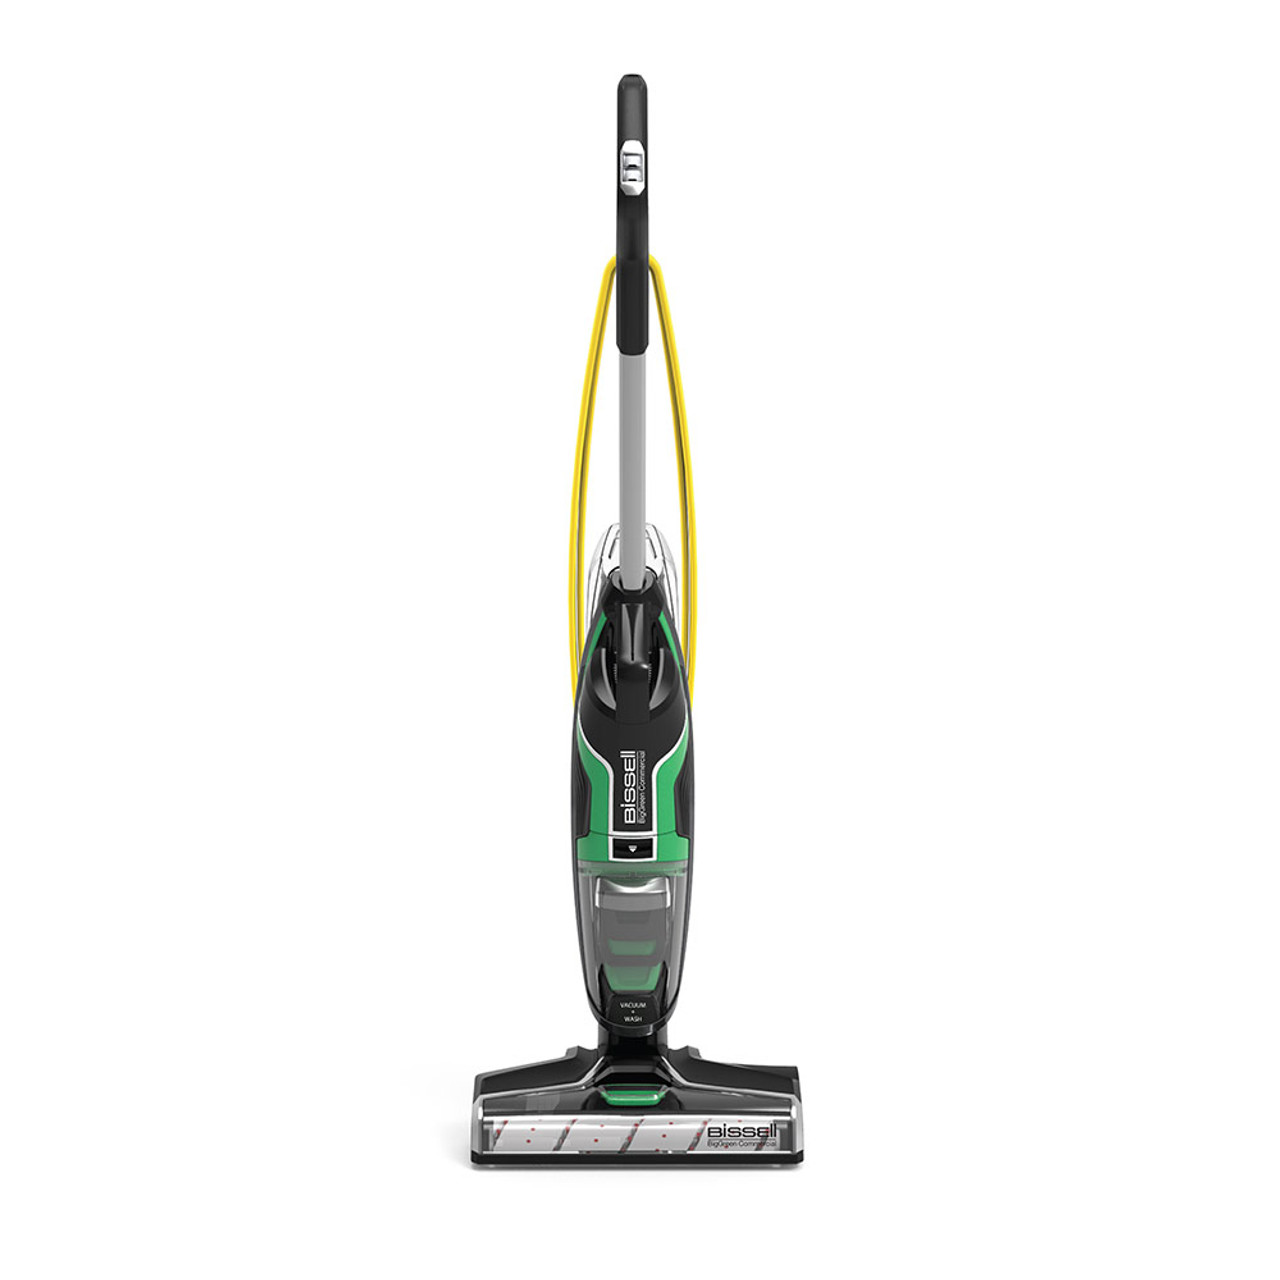 https://cdn11.bigcommerce.com/s-8mji1/images/stencil/1280x1280/products/7912/26415/BGFW13_floorwash_all_in_one_vacuum_mop__76700.1695331820.jpg?c=2